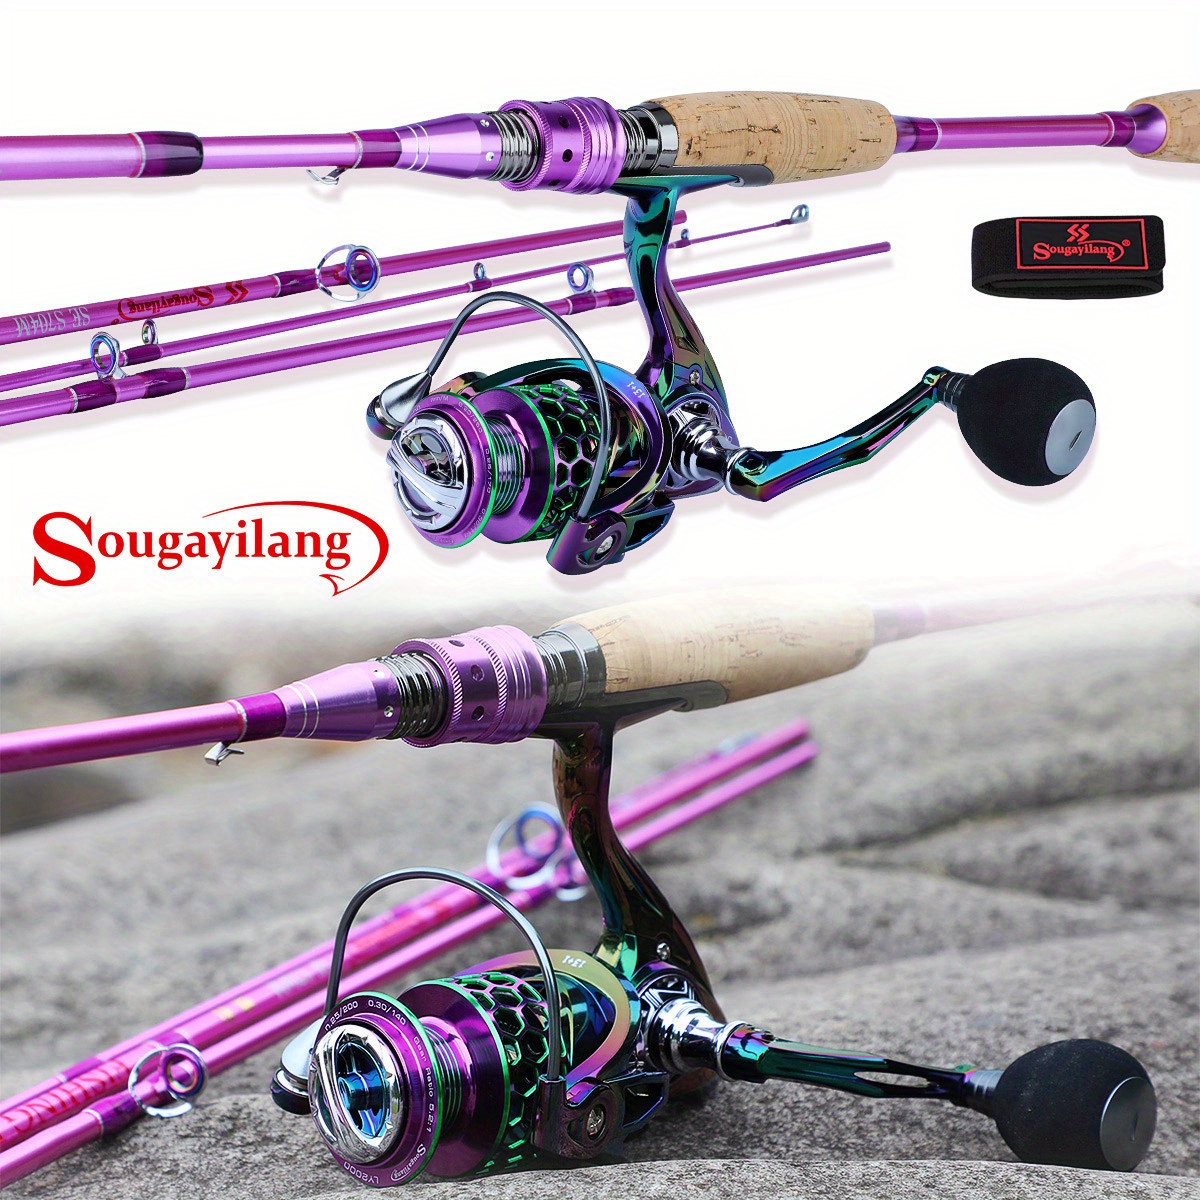 Cheap SOUGAYILANG Spinning Fishing Rod 1.8M 5 Sections Carbon Fiber Fishing  Pole 13+1BB Metal Spool Powerful Spinning Reel Combos